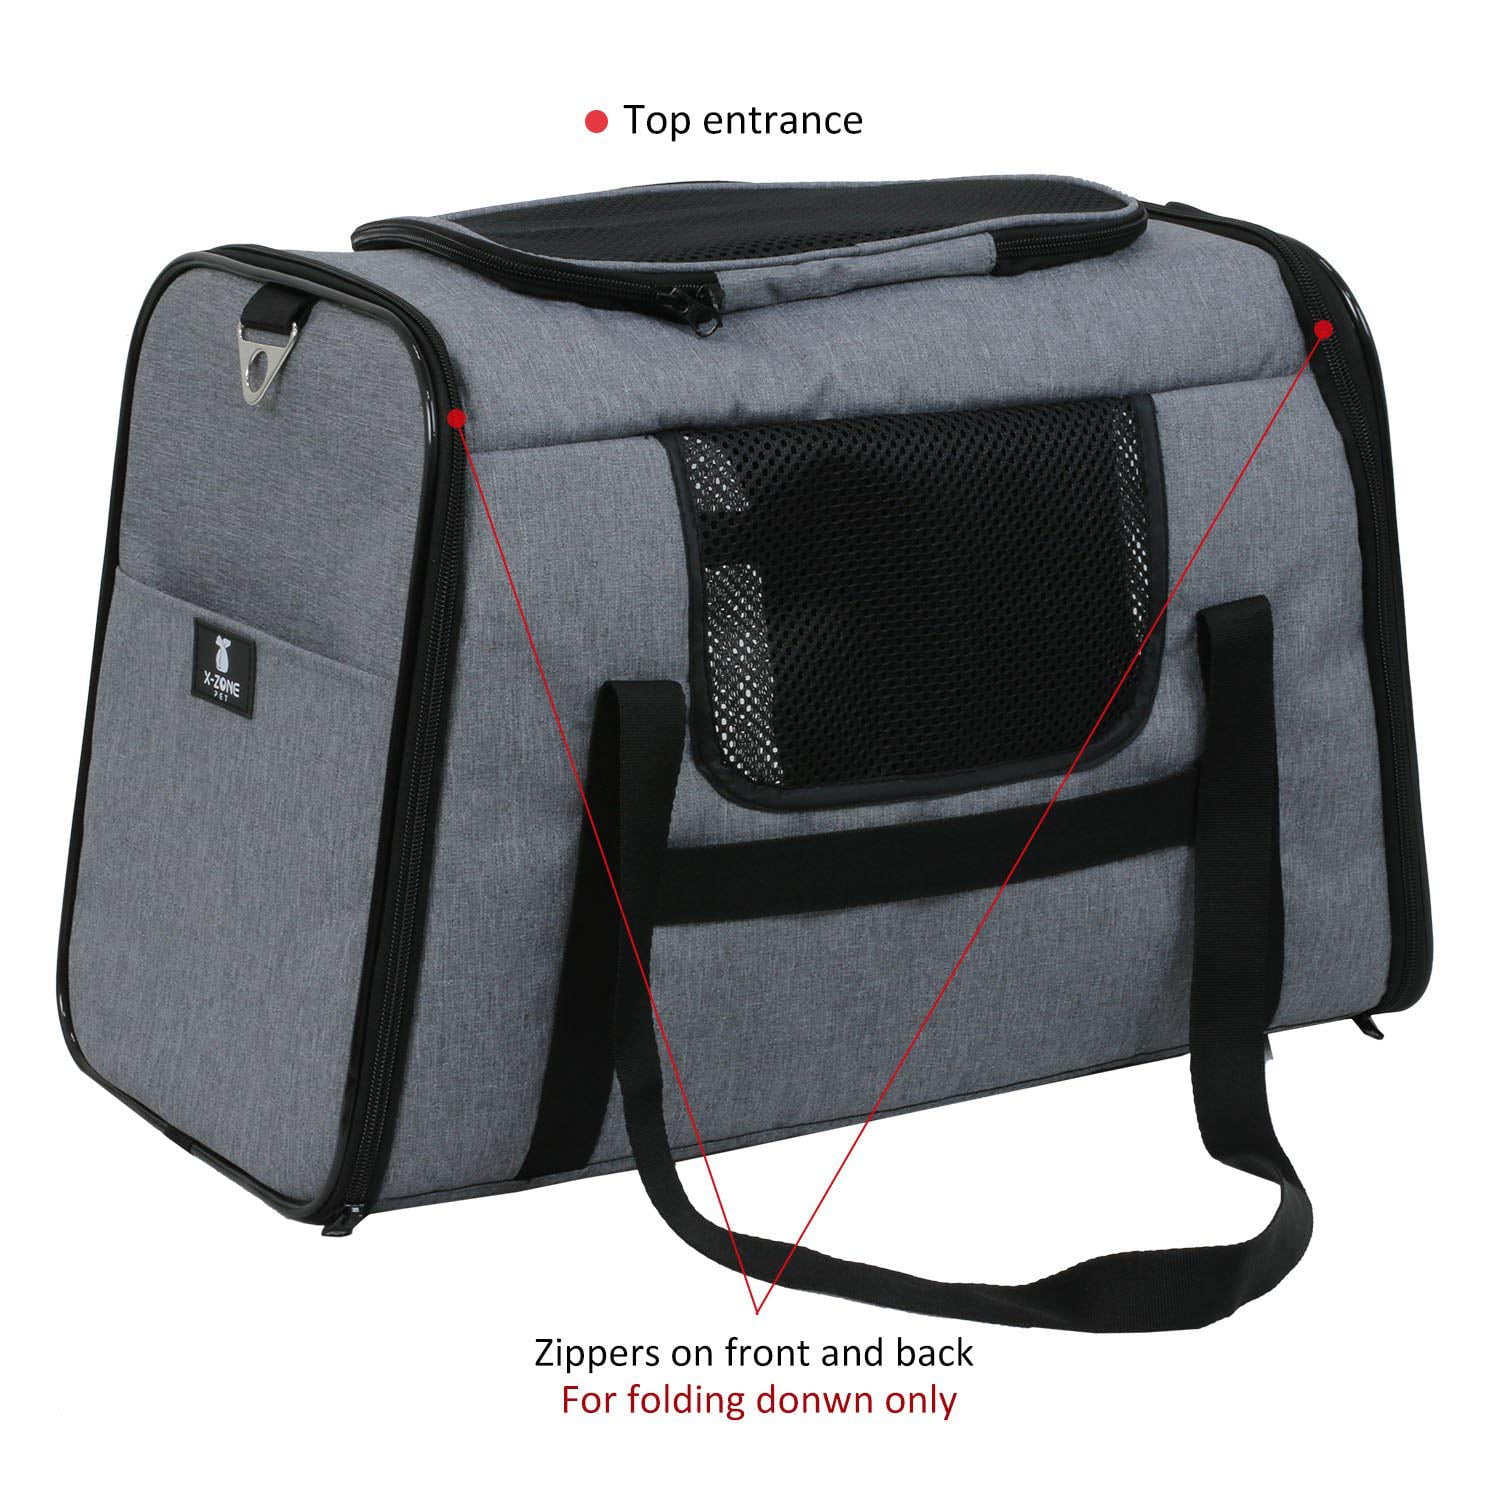 X-ZONE PET Airline Approved Pet Carriers,Comes with Fleece Pads Soft Sided Pet Carrier for Dog & Cat Large, Carbon Black 